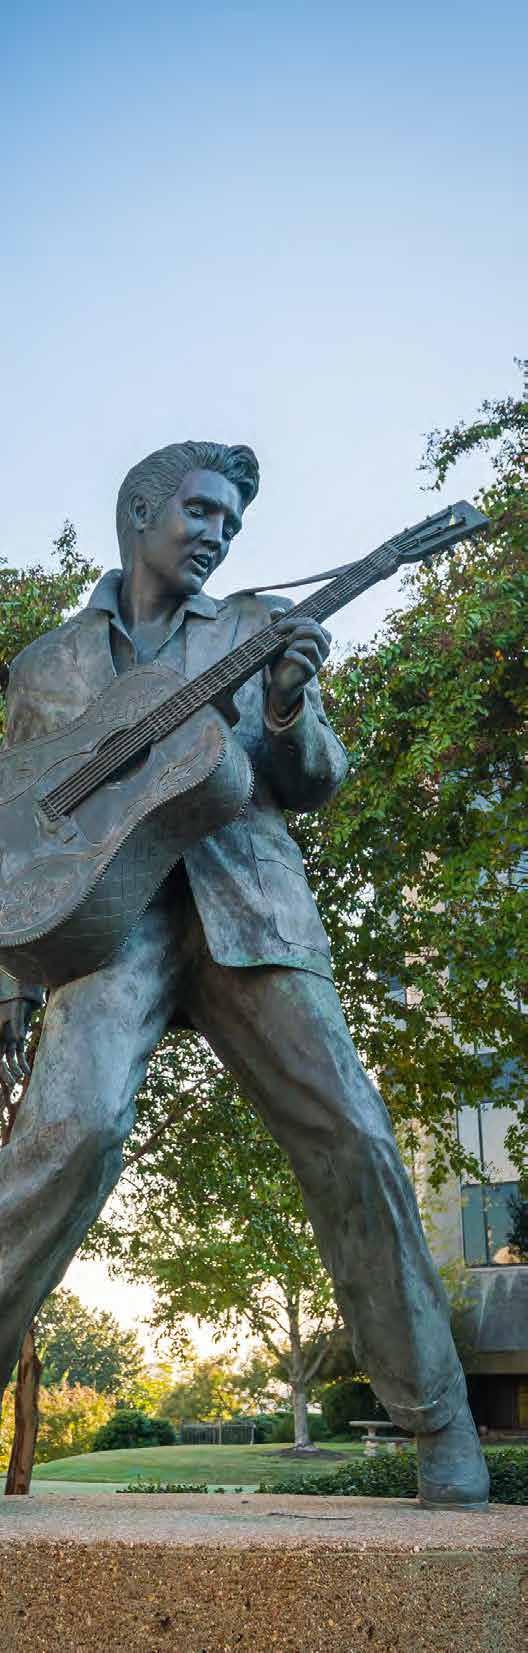 BACKGROUND CONTINUED: COUNTRY MUSIC ROOTS As the country continued to industrialize in the early 1900s, many Appalachian people left the Great Smoky Mountains to work in factories in Georgia and